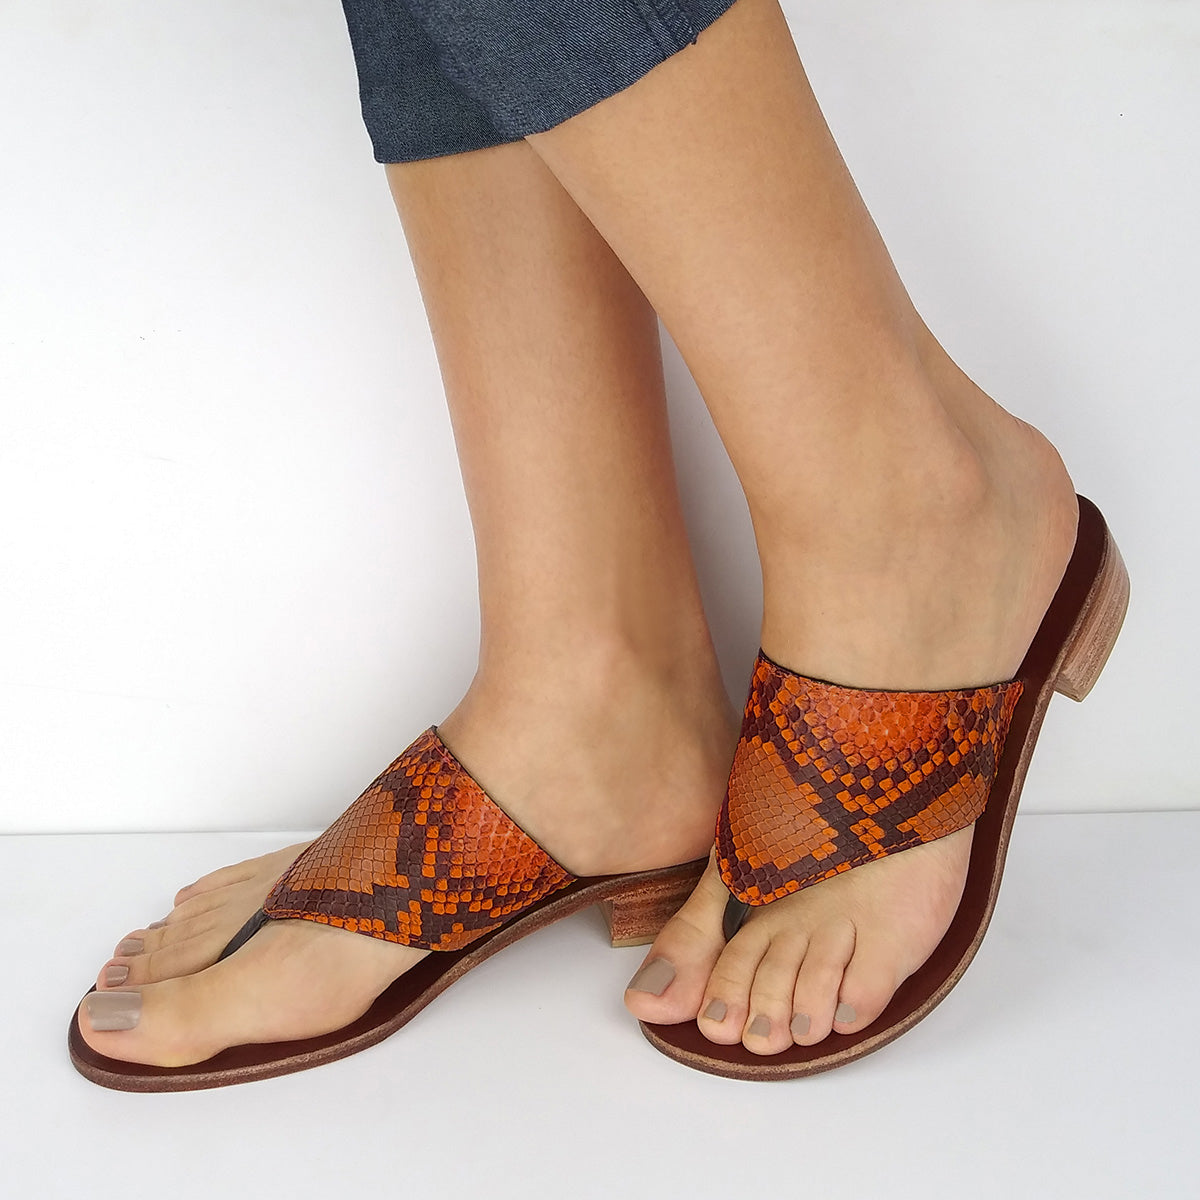 ONLY SIZE 9 AVAILABLE. Genuine Python Ochre Thong Sandals